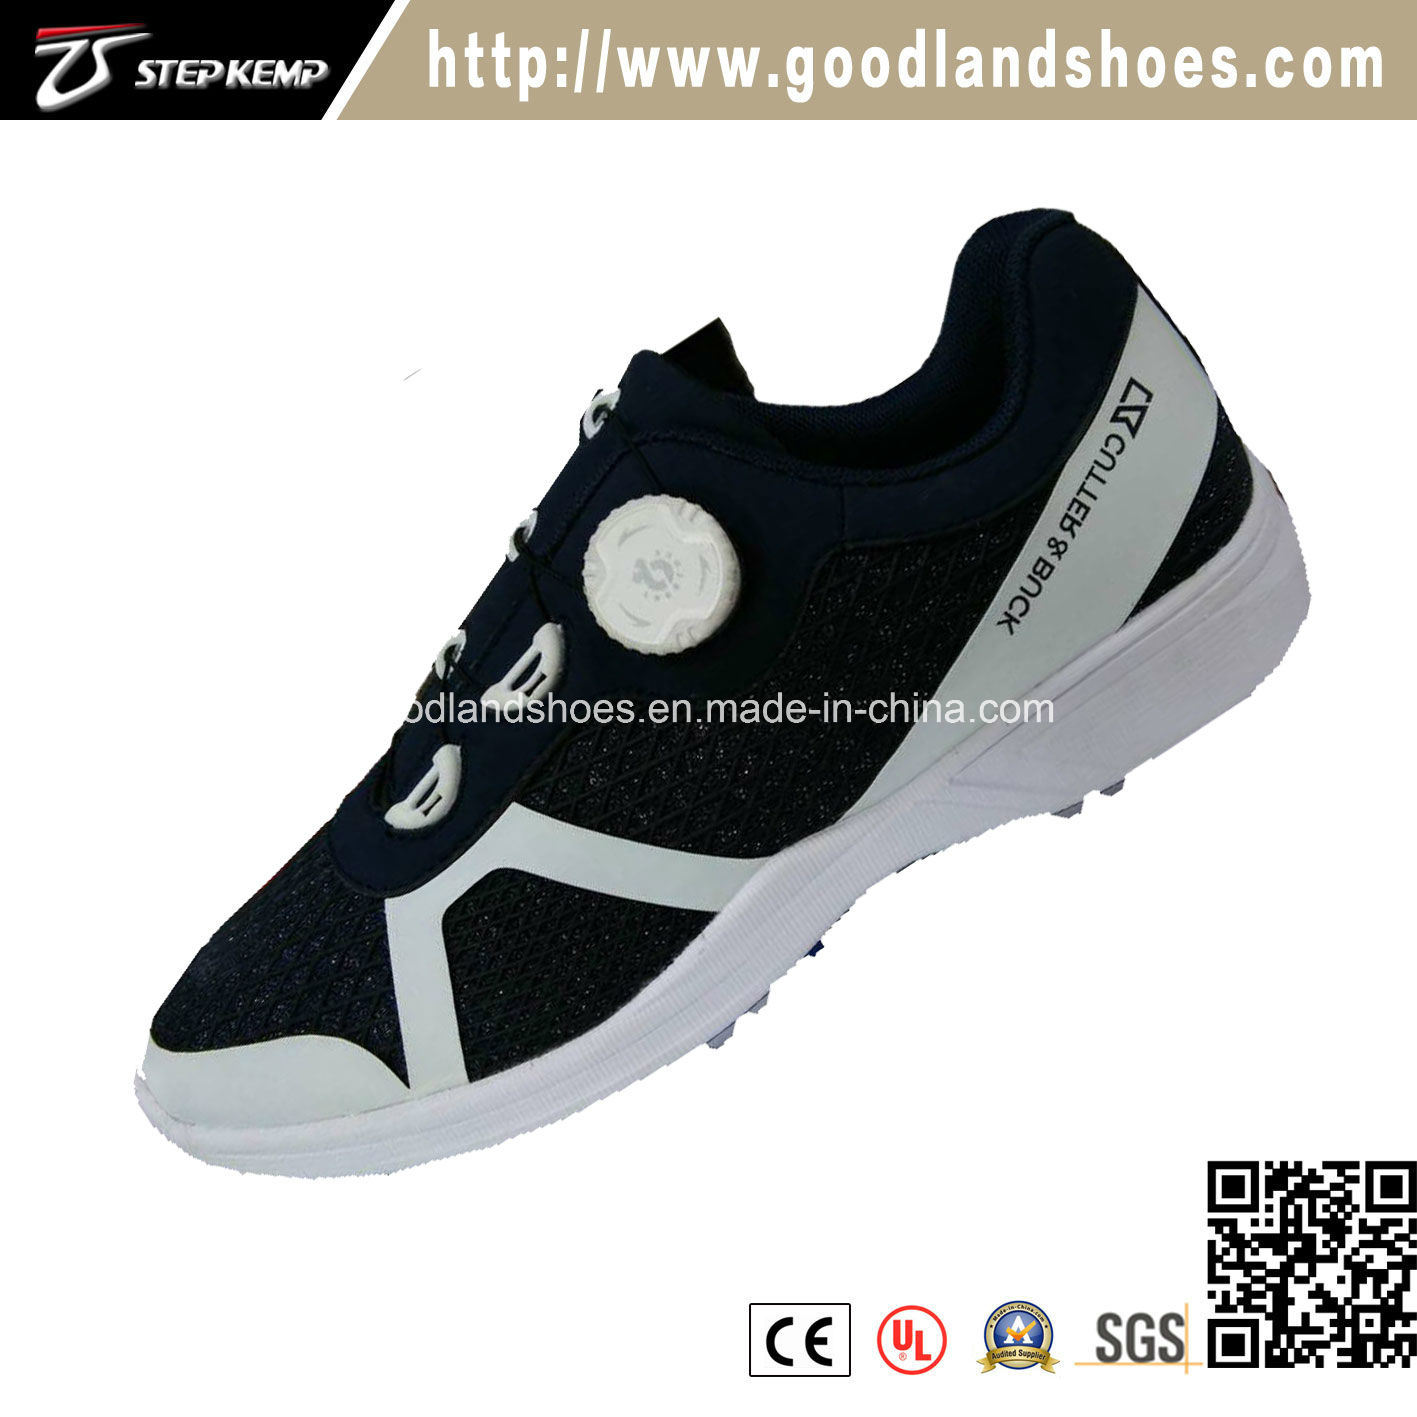 New Men's Lightweight Casual Golf Shoes with Mesh 20217